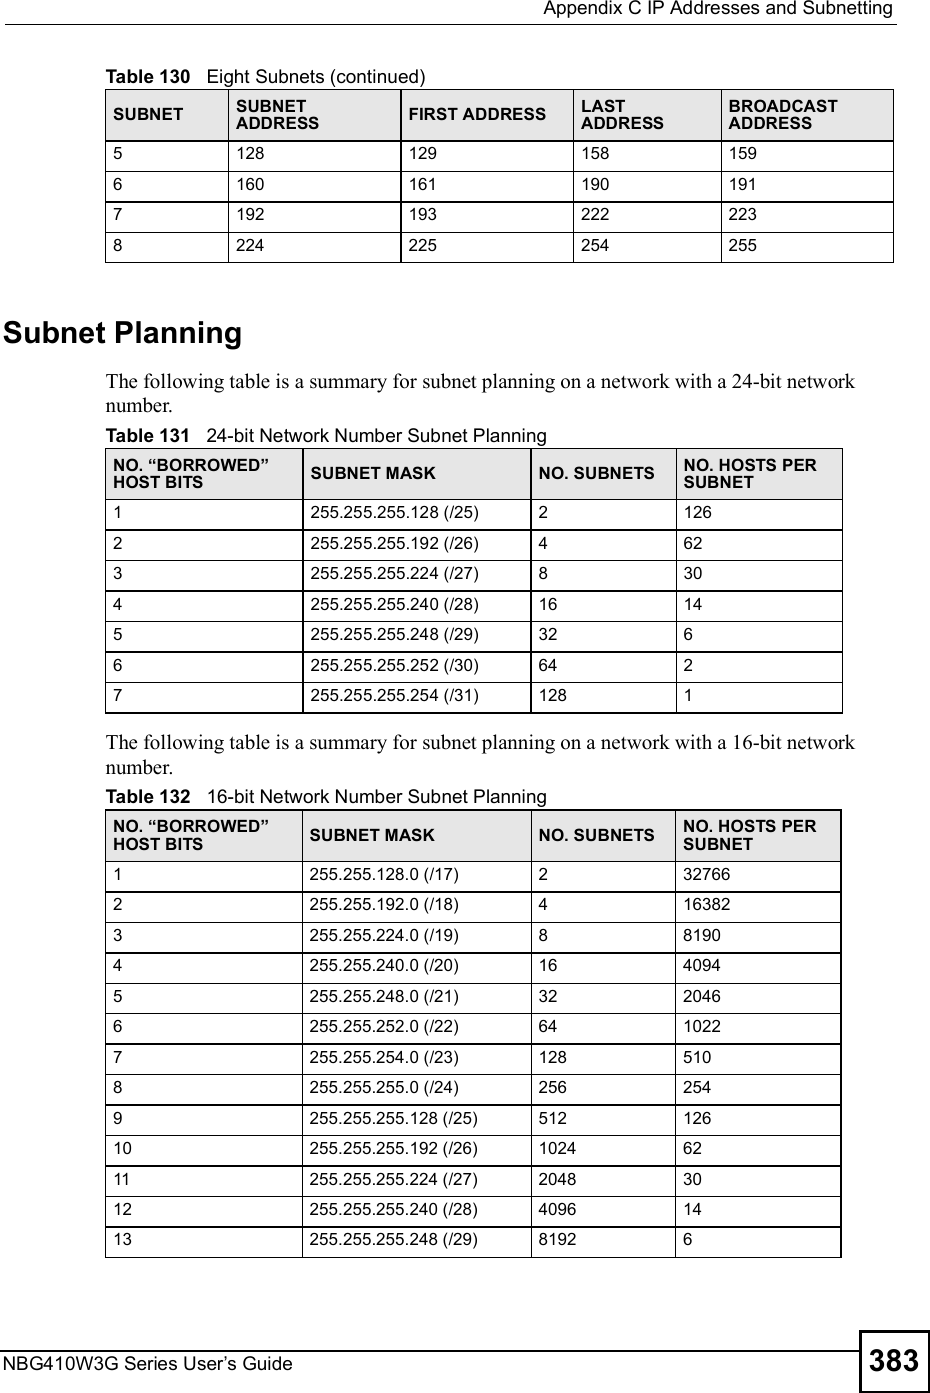  Appendix CIP Addresses and SubnettingNBG410W3G Series User s Guide 383Subnet PlanningThe following table is a summary for subnet planning on a network with a 24-bit network number.The following table is a summary for subnet planning on a network with a 16-bit network number. 5128 129 158 1596 160 161 190 1917 192 193 222 2238 224 225 254 255Table 130   Eight Subnets (continued)SUBNET SUBNET ADDRESS FIRST ADDRESS LAST ADDRESSBROADCAST ADDRESSTable 131   24-bit Network Number Subnet PlanningNO. &quot;BORROWED# HOST BITS SUBNET MASK NO. SUBNETS NO. HOSTS PER SUBNET1255.255.255.128 (/25) 2 1262 255.255.255.192 (/26) 4 623 255.255.255.224 (/27) 8 304 255.255.255.240 (/28) 16 145 255.255.255.248 (/29) 32 66 255.255.255.252 (/30) 64 27 255.255.255.254 (/31) 128 1Table 132   16-bit Network Number Subnet PlanningNO. &quot;BORROWED# HOST BITS SUBNET MASK NO. SUBNETS NO. HOSTS PER SUBNET1255.255.128.0 (/17) 2 327662 255.255.192.0 (/18) 4 163823 255.255.224.0 (/19) 8 81904 255.255.240.0 (/20) 16 40945 255.255.248.0 (/21) 32 20466 255.255.252.0 (/22) 64 10227 255.255.254.0 (/23) 128 5108 255.255.255.0 (/24) 256 2549 255.255.255.128 (/25) 512 12610 255.255.255.192 (/26) 1024 6211 255.255.255.224 (/27) 2048 3012 255.255.255.240 (/28) 4096 1413 255.255.255.248 (/29) 8192 6